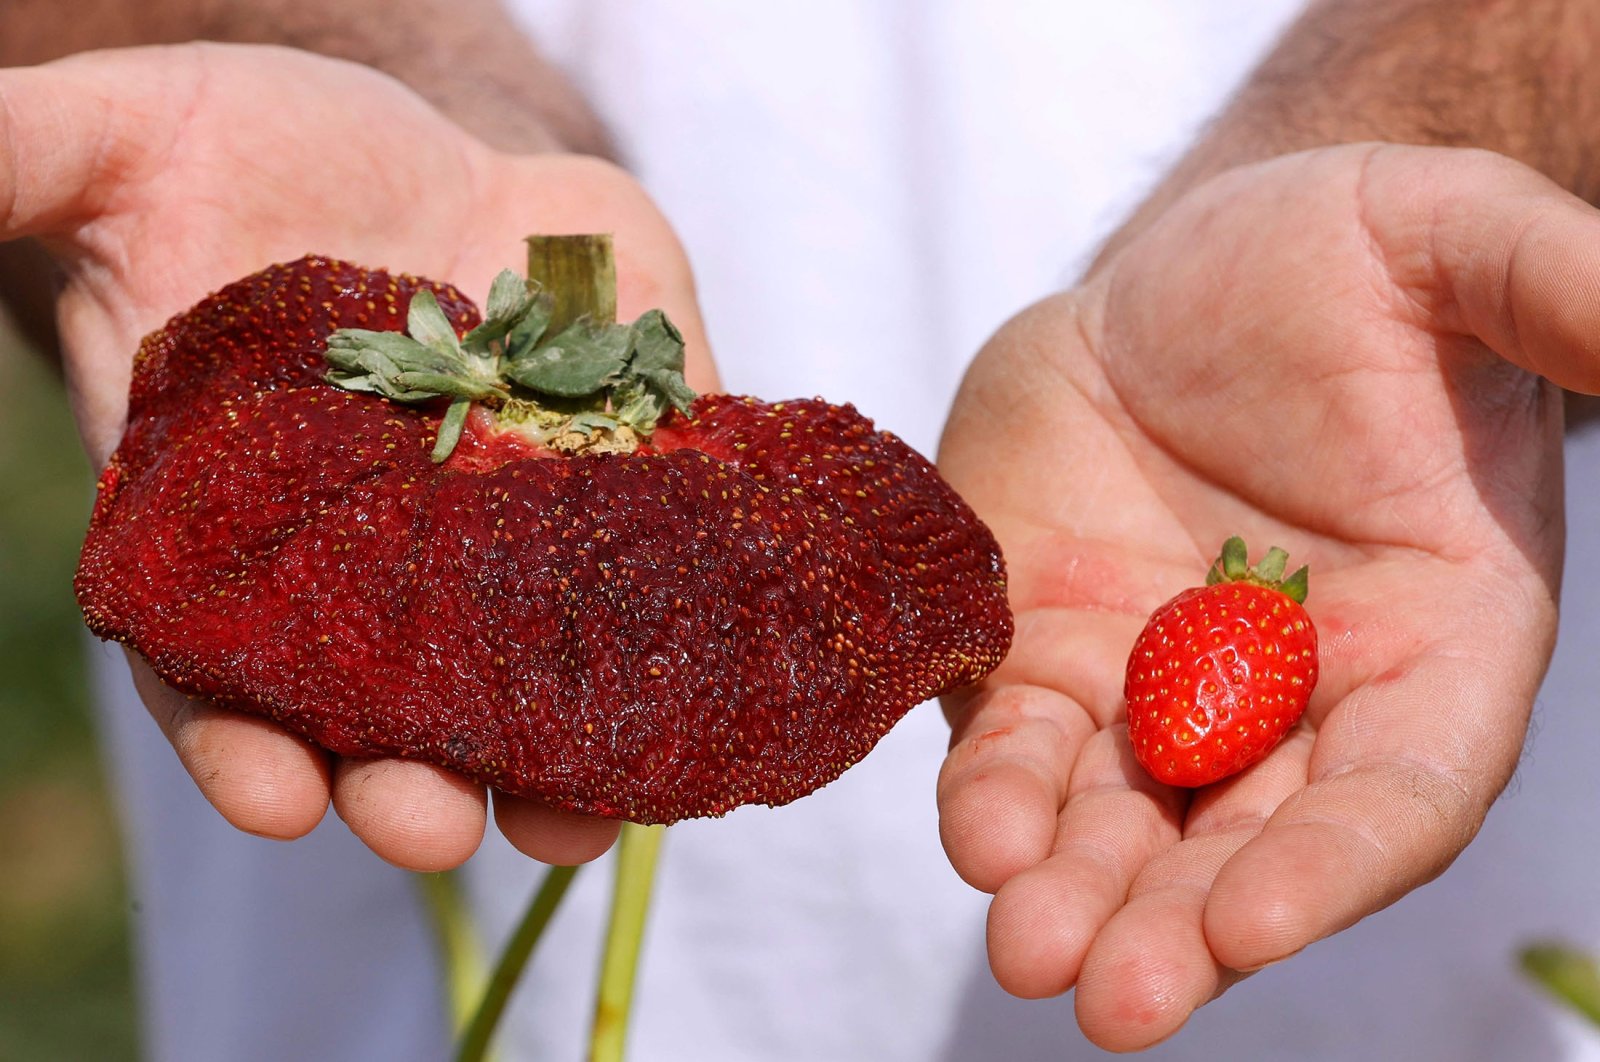 Israeli farmer Tzachi Ariel displays a 289 grams strawberry (L) that was found in his agricultural field and set a new Guinness World Records for the heaviest strawberry, in the Kadima village, central Israel, Feb. 17, 2022. (AFP Photo)